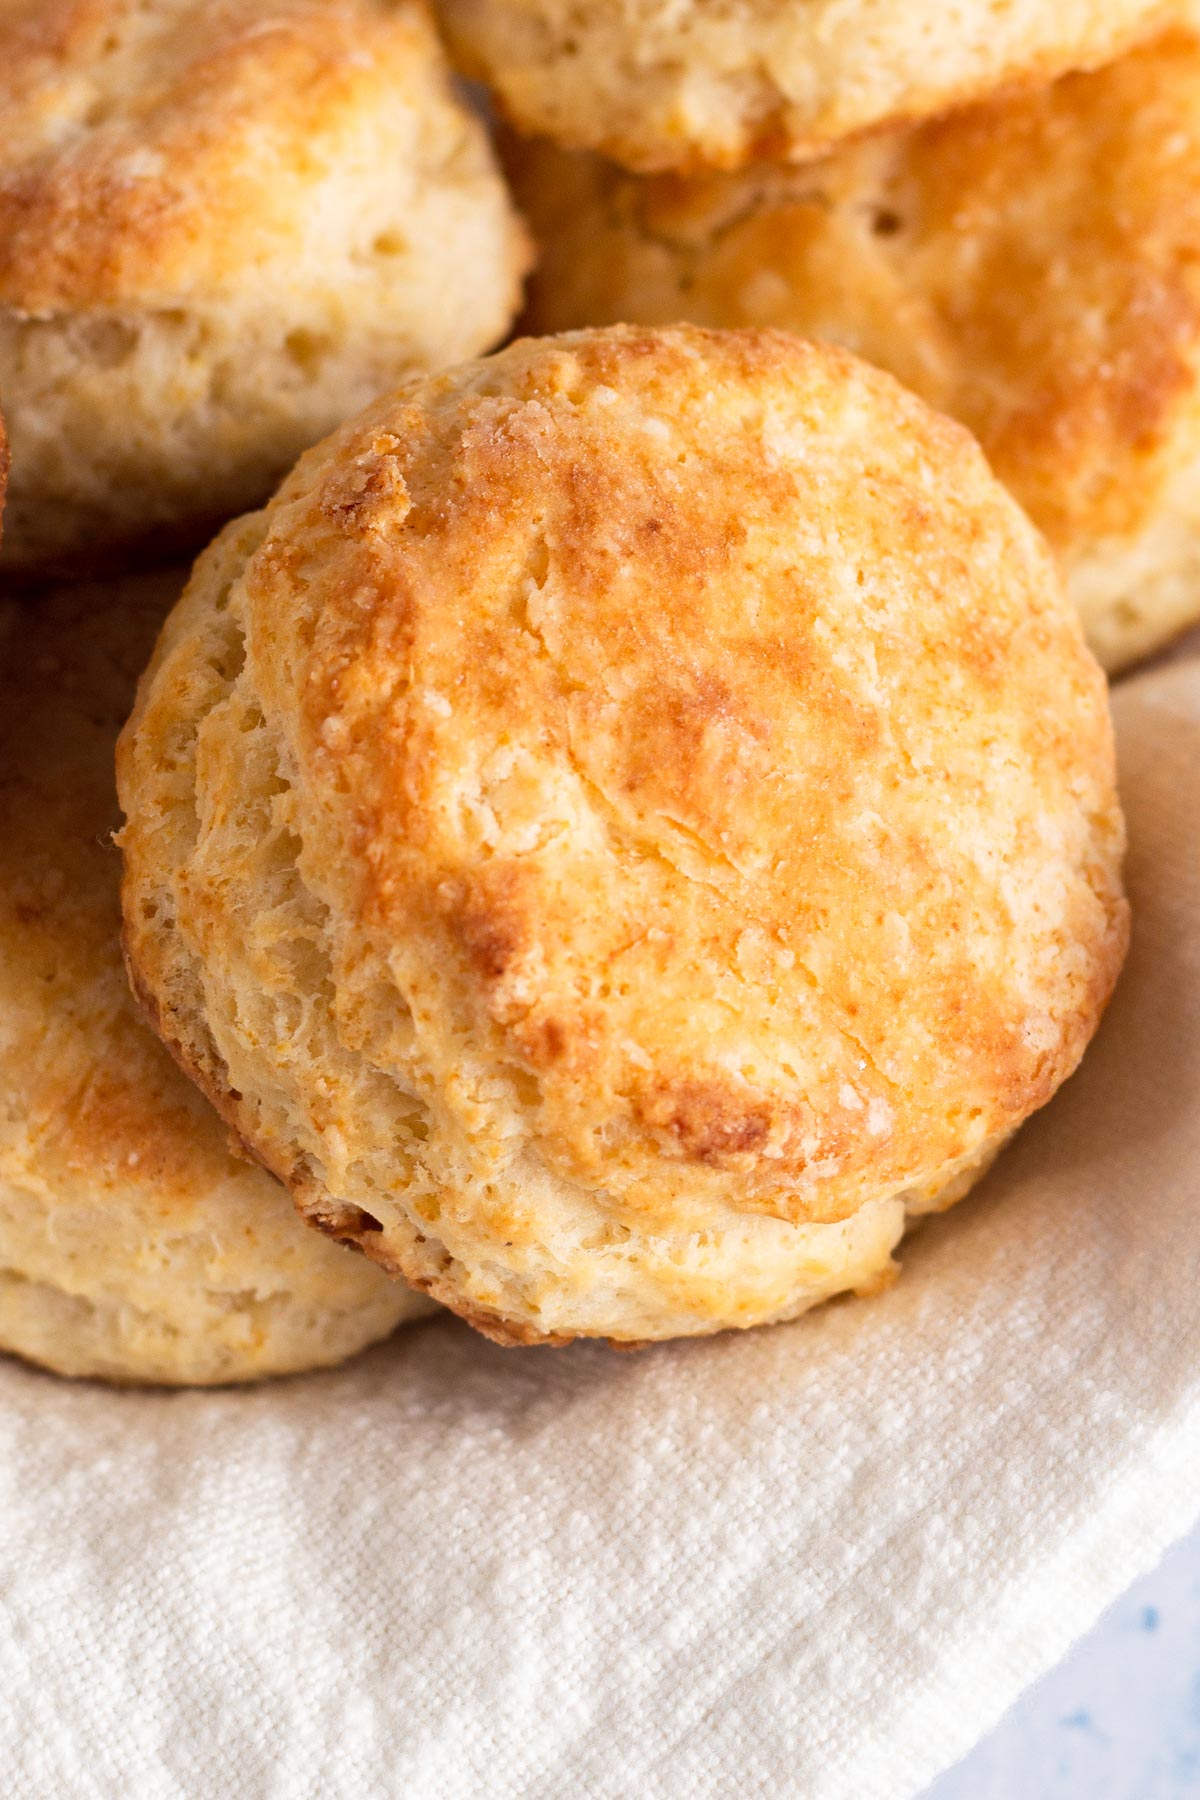 angled view of biscuits on a white linen napkin